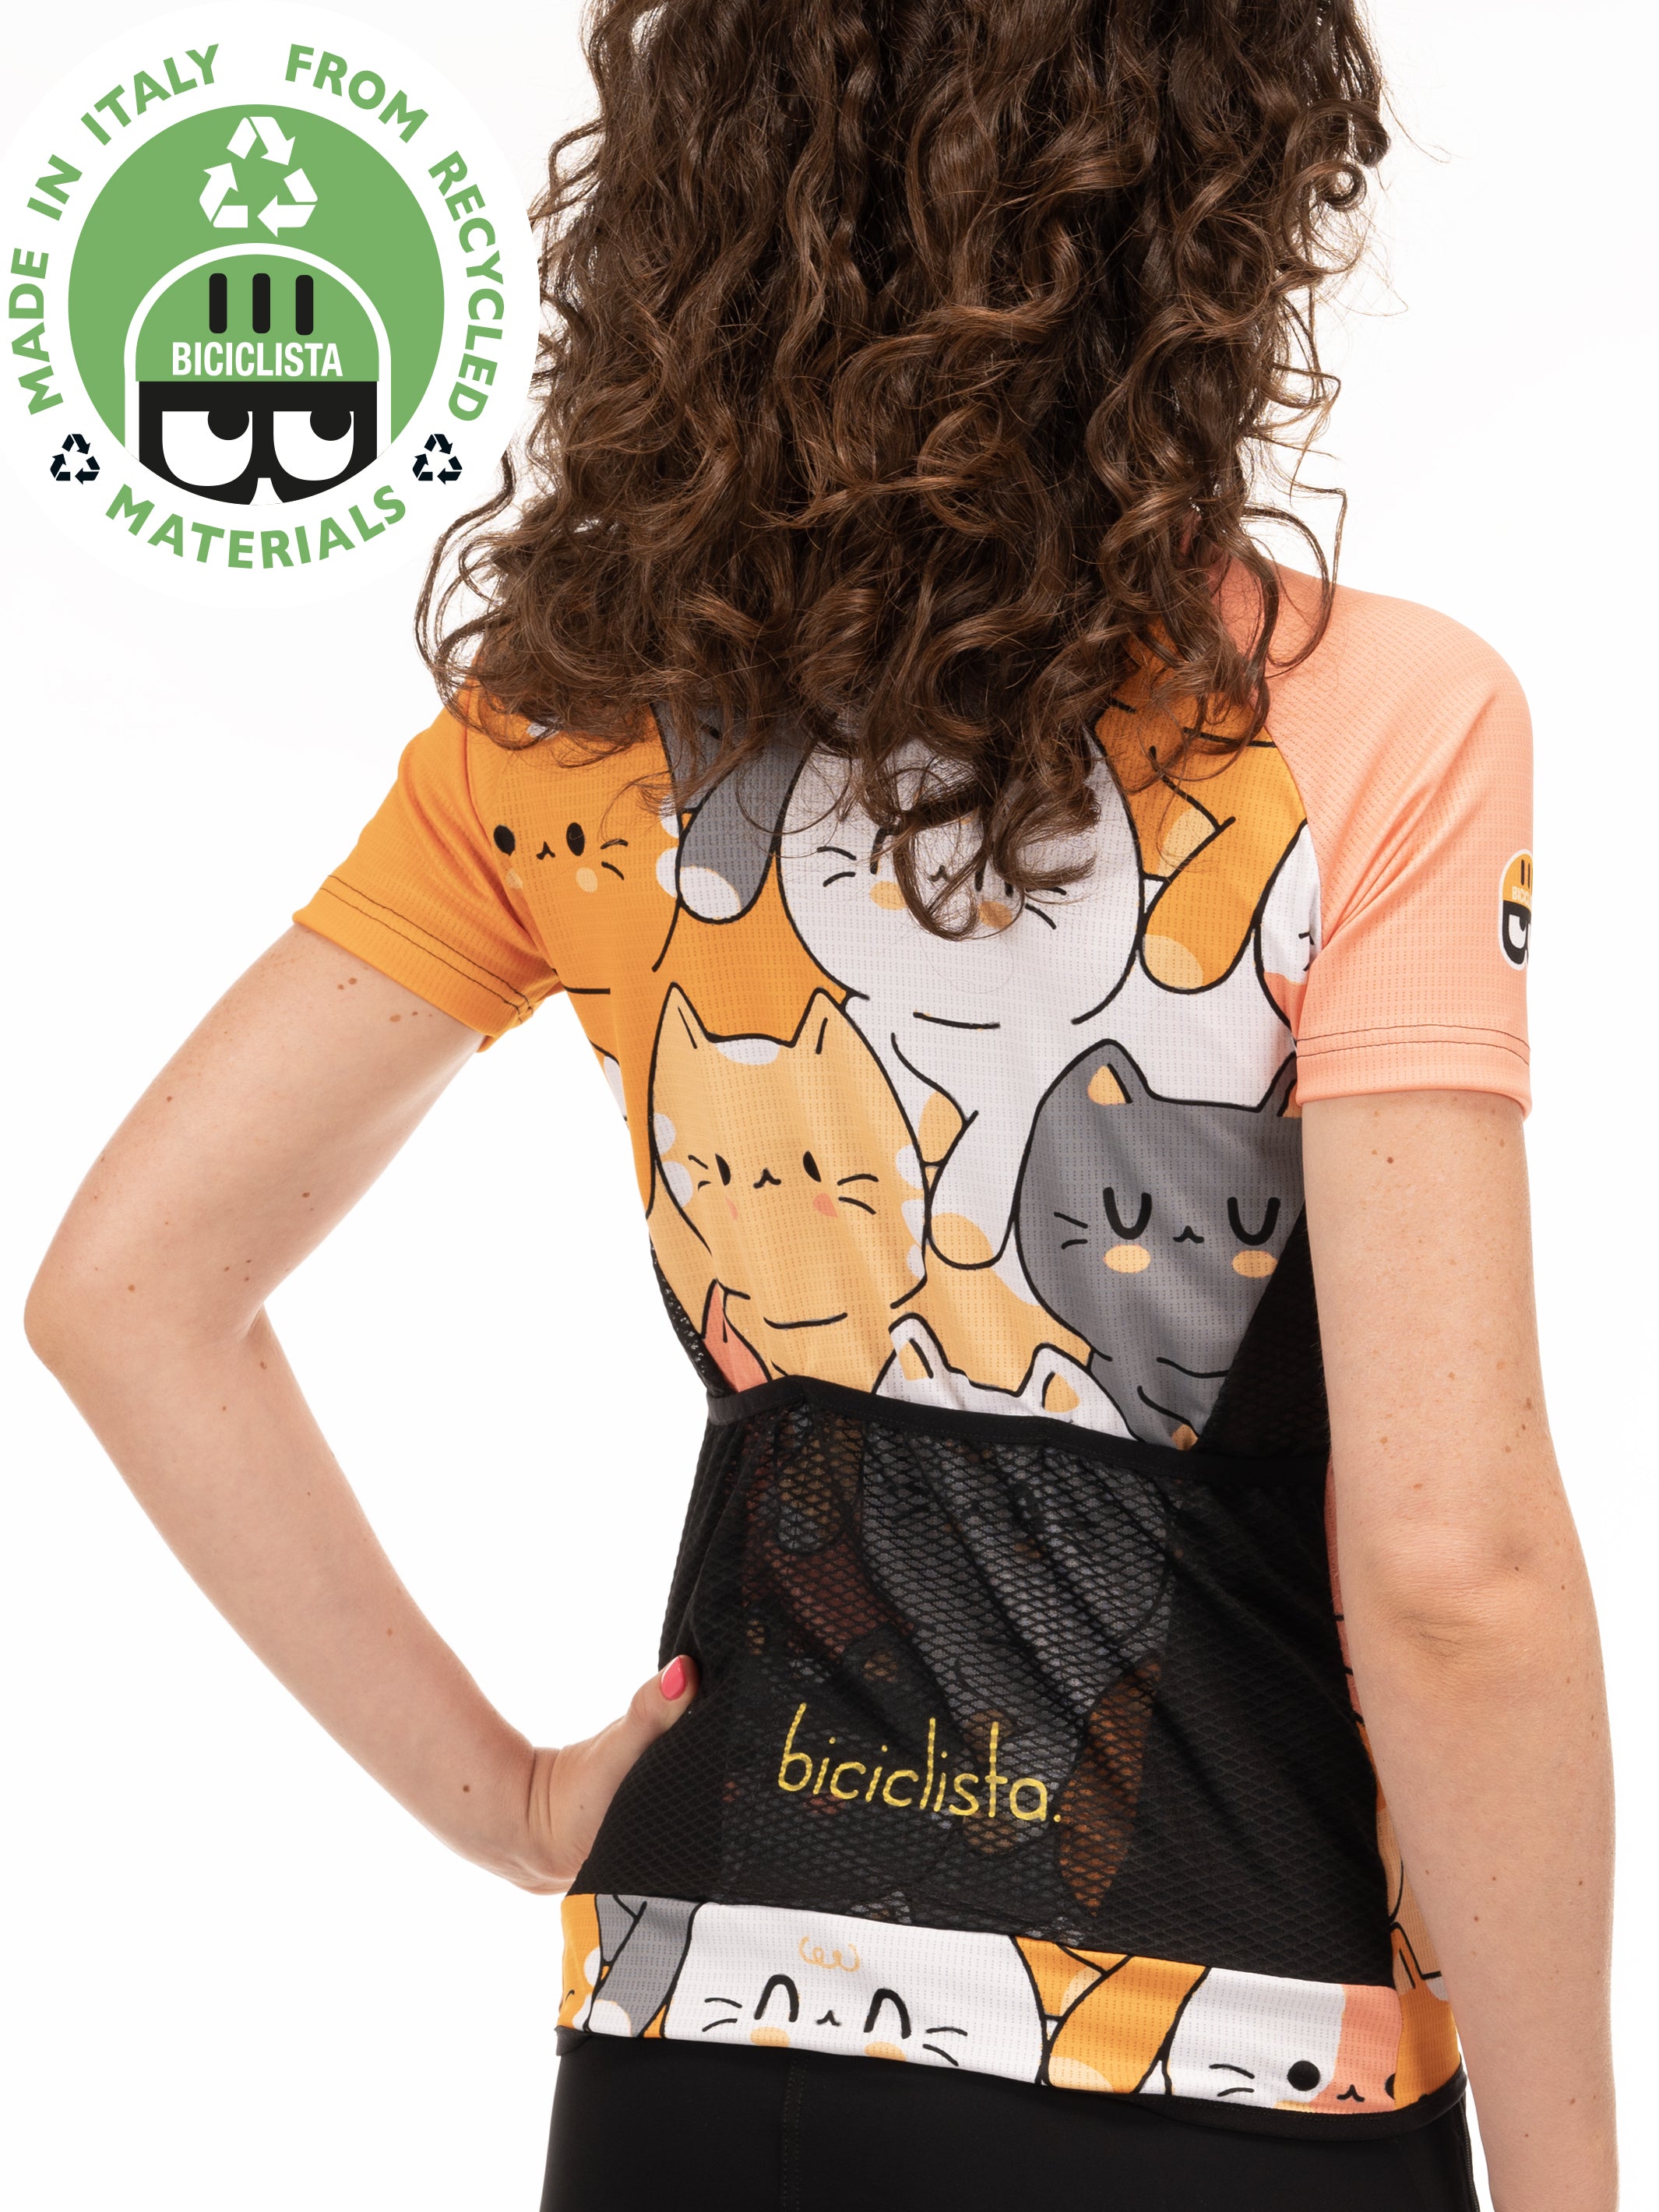 ANOTHER CAT JERSEY - Women's Right-on Jersey